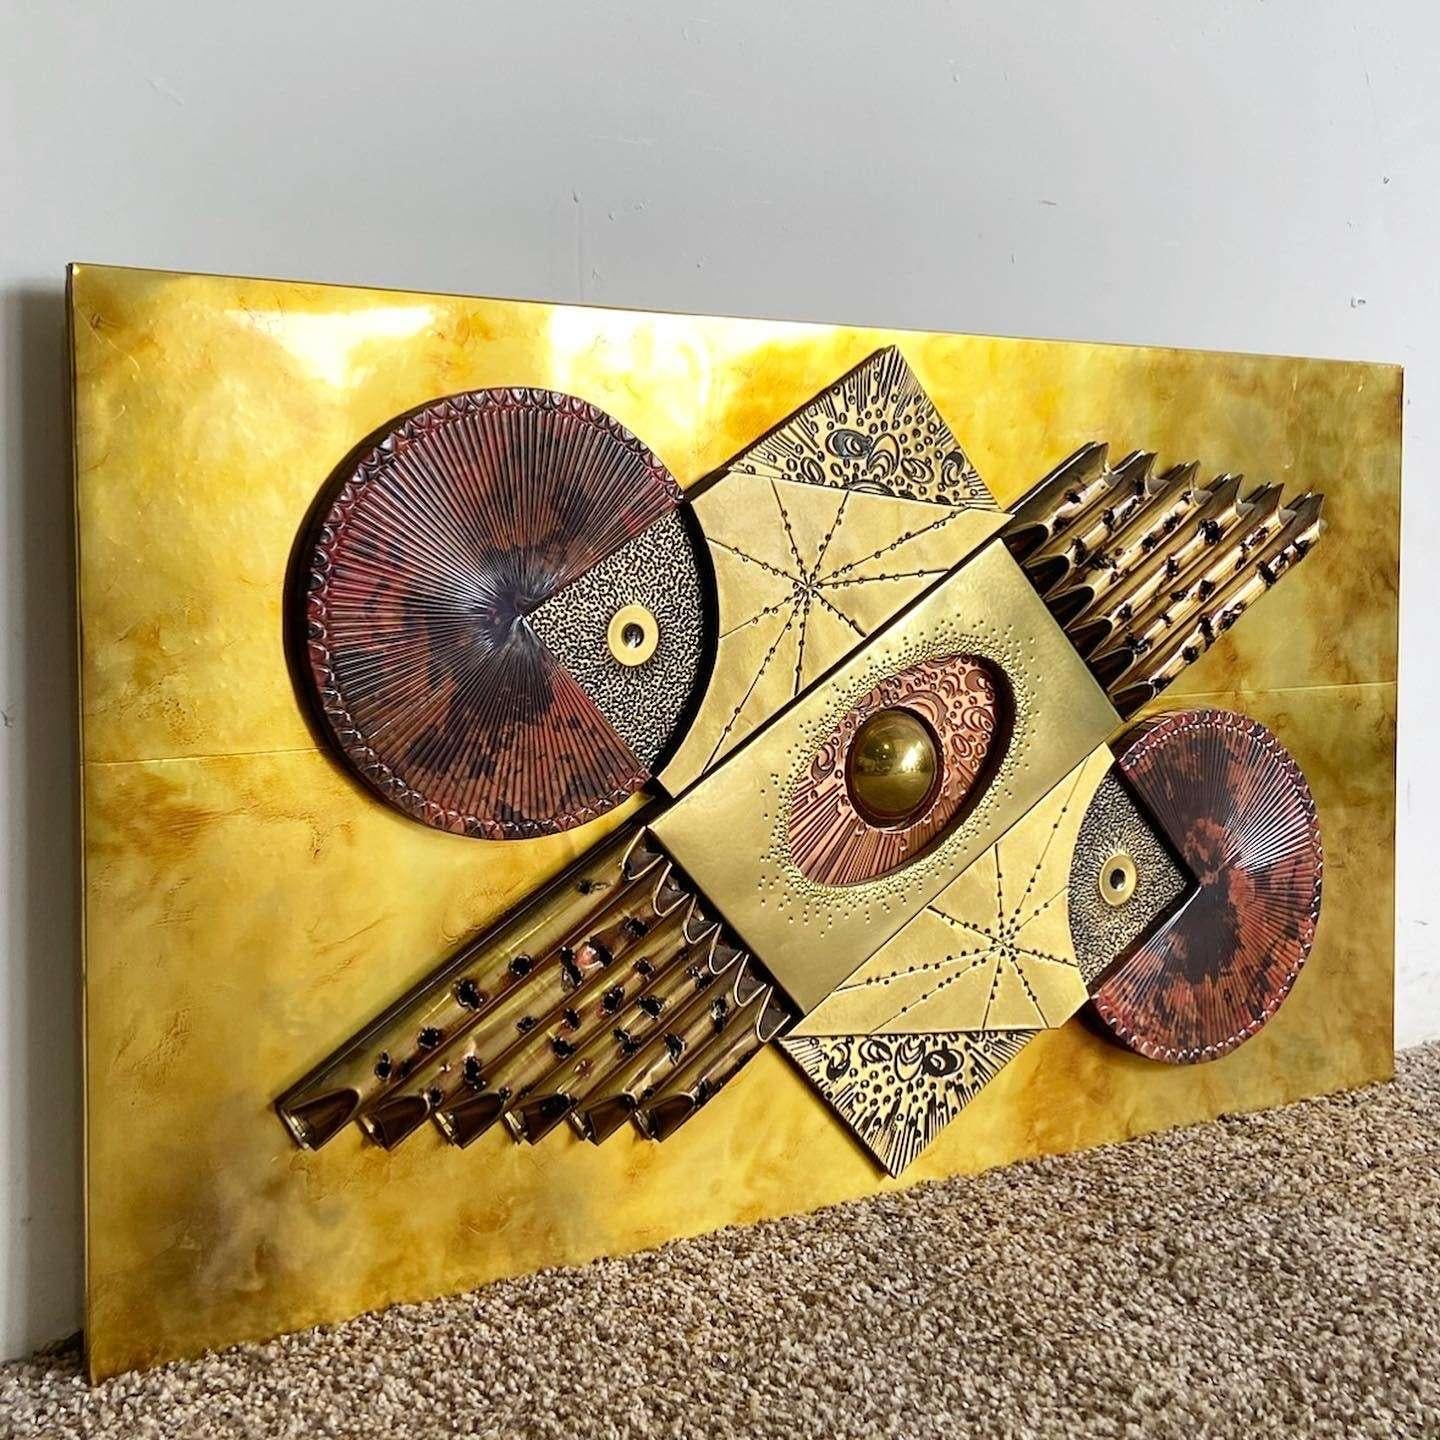 Wonderful piece of postmodern art work. Features a metallic copper, gold and brass abstract design comprised of shapes and textured.

